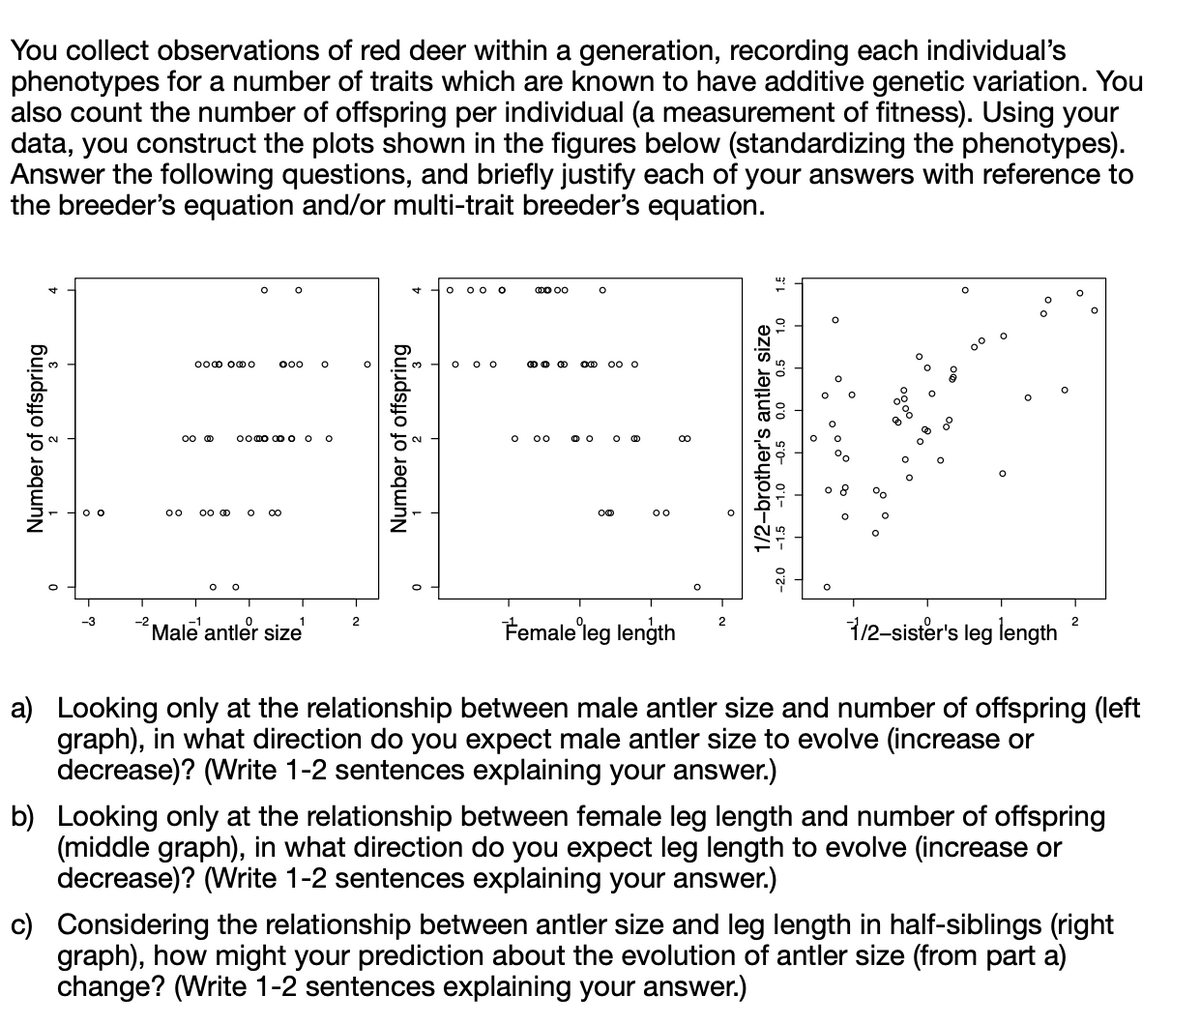 You collect observations of red deer within a generation, recording each individual's
phenotypes for a number of traits which are known to have additive genetic variation. You
also count the number of offspring per individual (a measurement of fitness). Using your
data, you construct the plots shown in the figures below (standardizing the phenotypes).
Answer the following questions, and briefly justify each of your answers with reference to
the breeder's equation and/or multi-trait breeder's equation.
Number of offspring
OO @
00
OOO OOO 000
O
O
oooo O
O ∞
²Male' antler size
2
Number of offspring
O
00 0
0 00
OD OO
0 00
O
Om 00 0
OO
00
Female leg length
2
1.5
0.0 0.5 1.0
1/2-brother's antler size
-1.5 -1.0 -0.5
o
O
1/2-sister's leg length
O
O
2
O
a) Looking only at the relationship between male antler size and number of offspring (left
graph), in what direction do you expect male antler size to evolve (increase or
decrease)? (Write 1-2 sentences explaining your answer.)
b) Looking only at the relationship between female leg length and number of offspring
(middle graph), in what direction do you expect leg length to evolve (increase or
decrease)? (Write 1-2 sentences explaining your answer.)
c) Considering the relationship between antler size and leg length in half-siblings (right
graph), how might your prediction about the evolution of antler size (from part a)
change? (Write 1-2 sentences explaining your answer.)